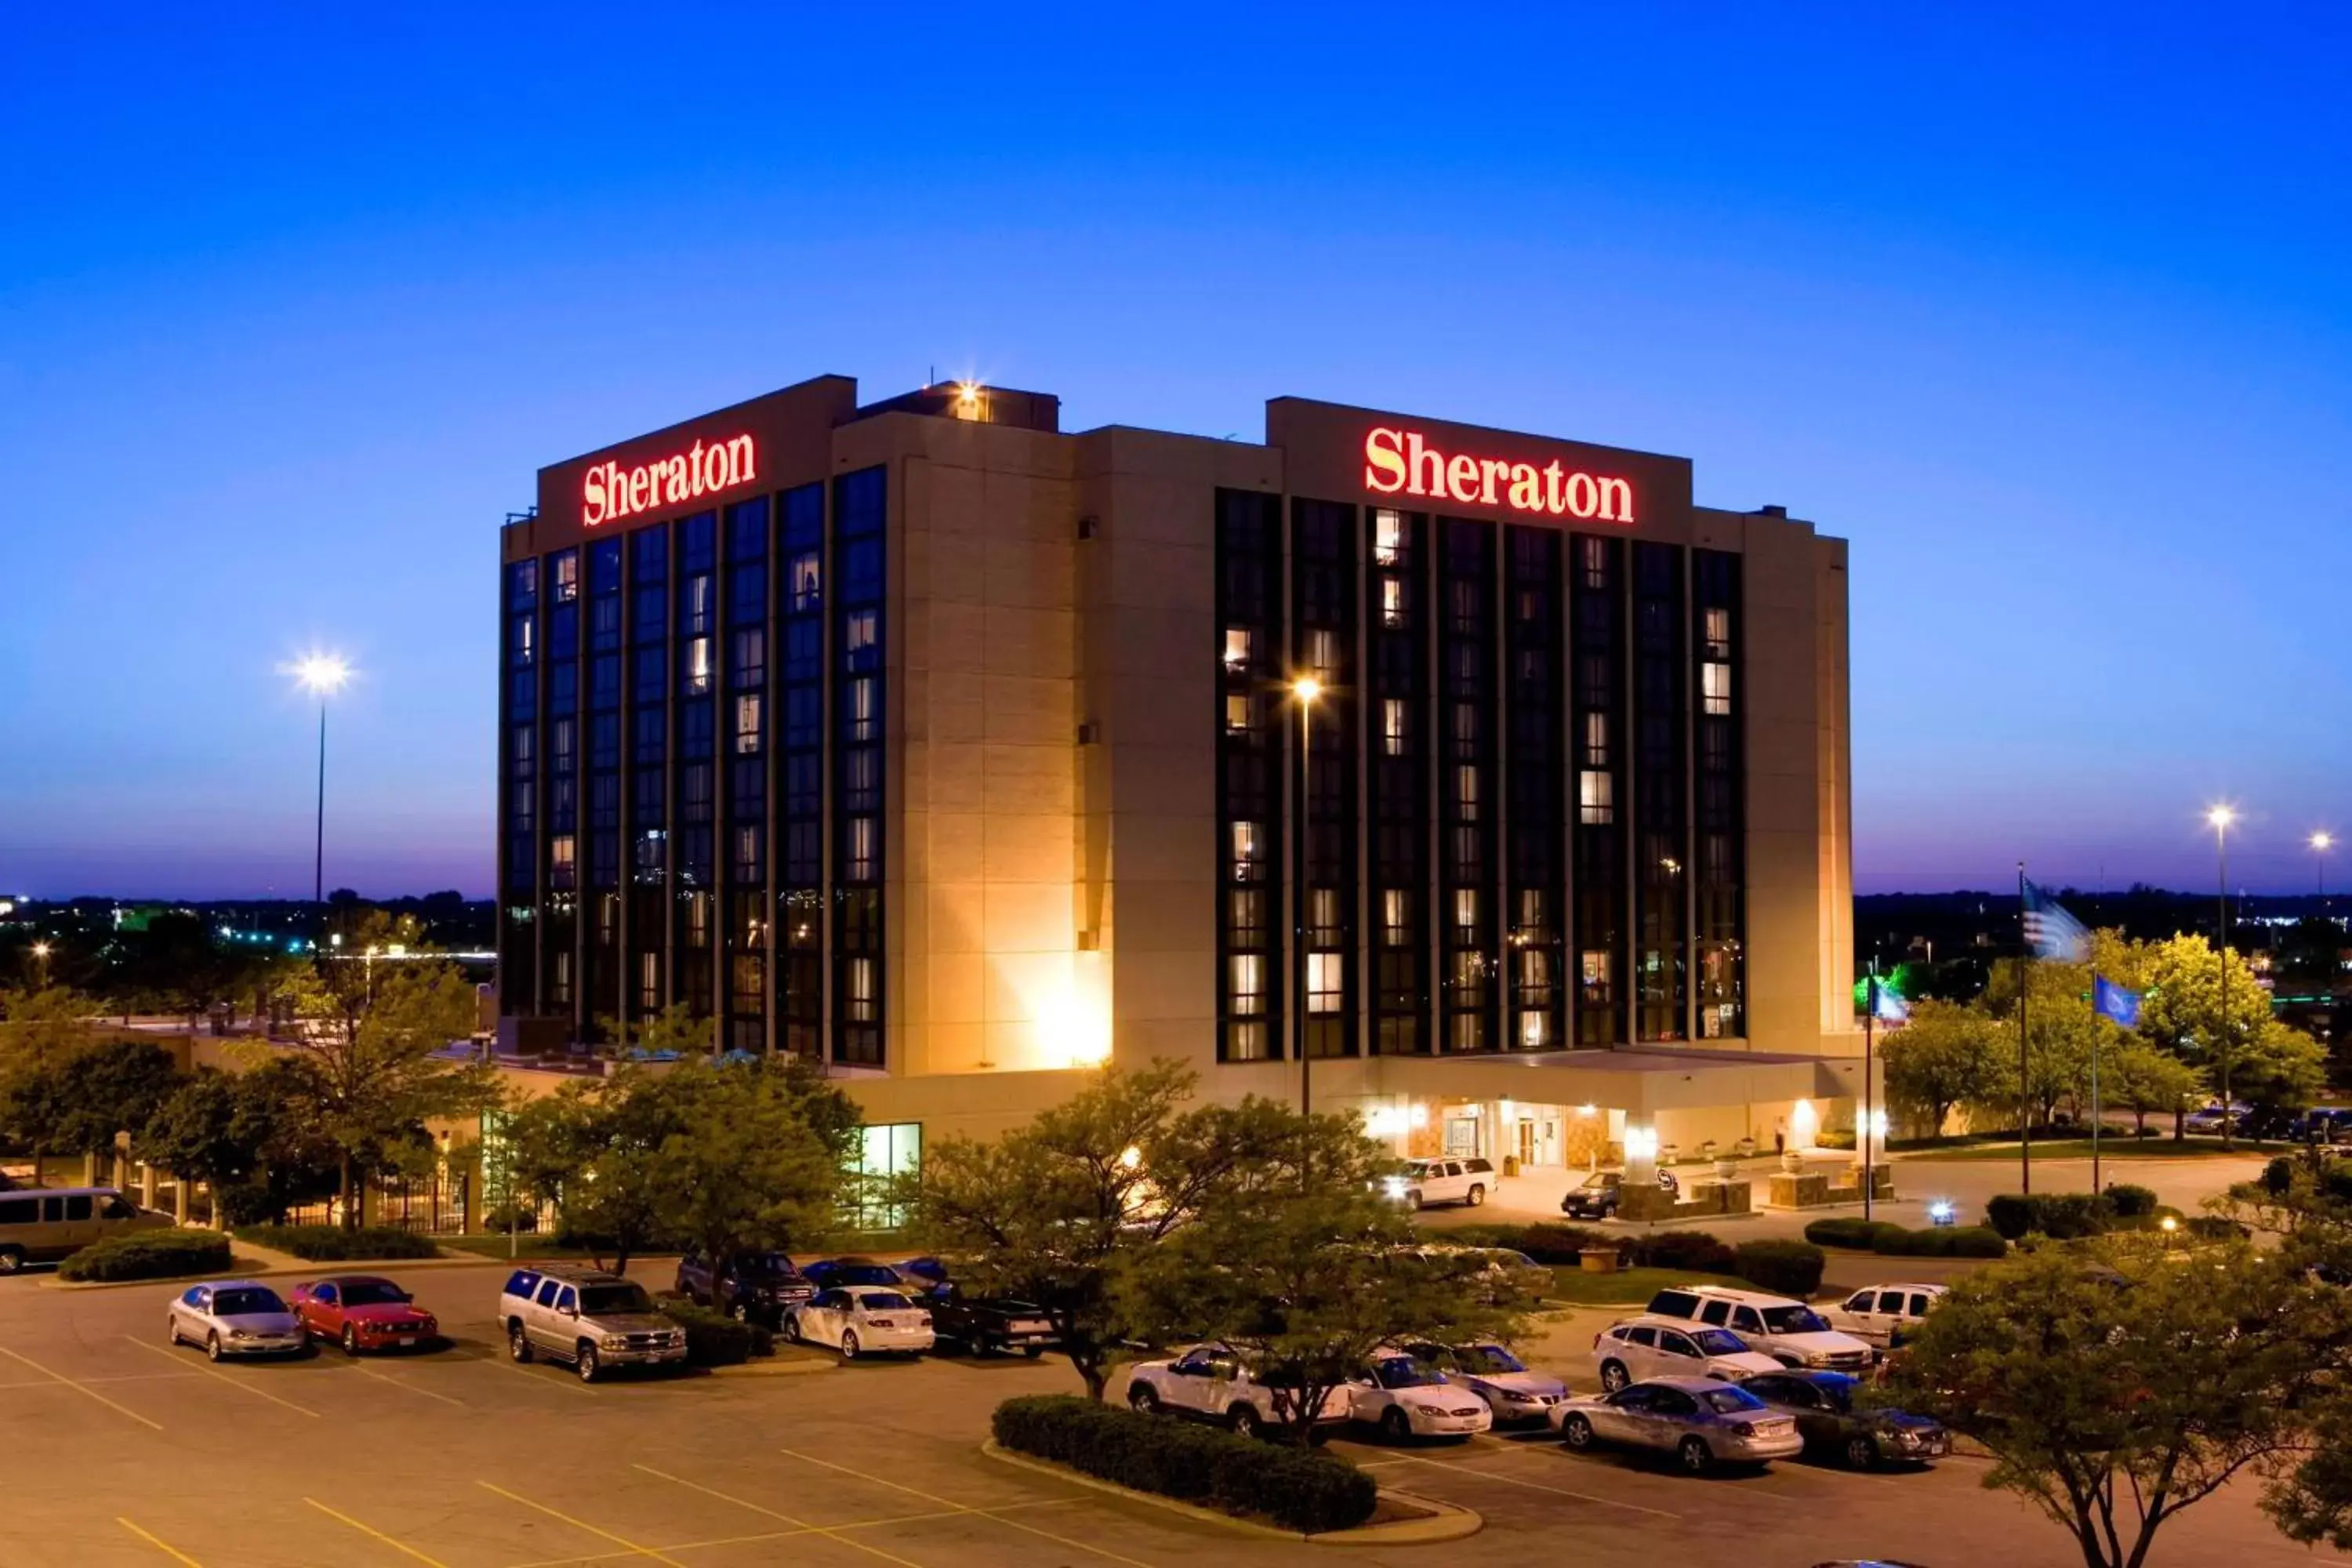 Property Building in Sheraton West Des Moines